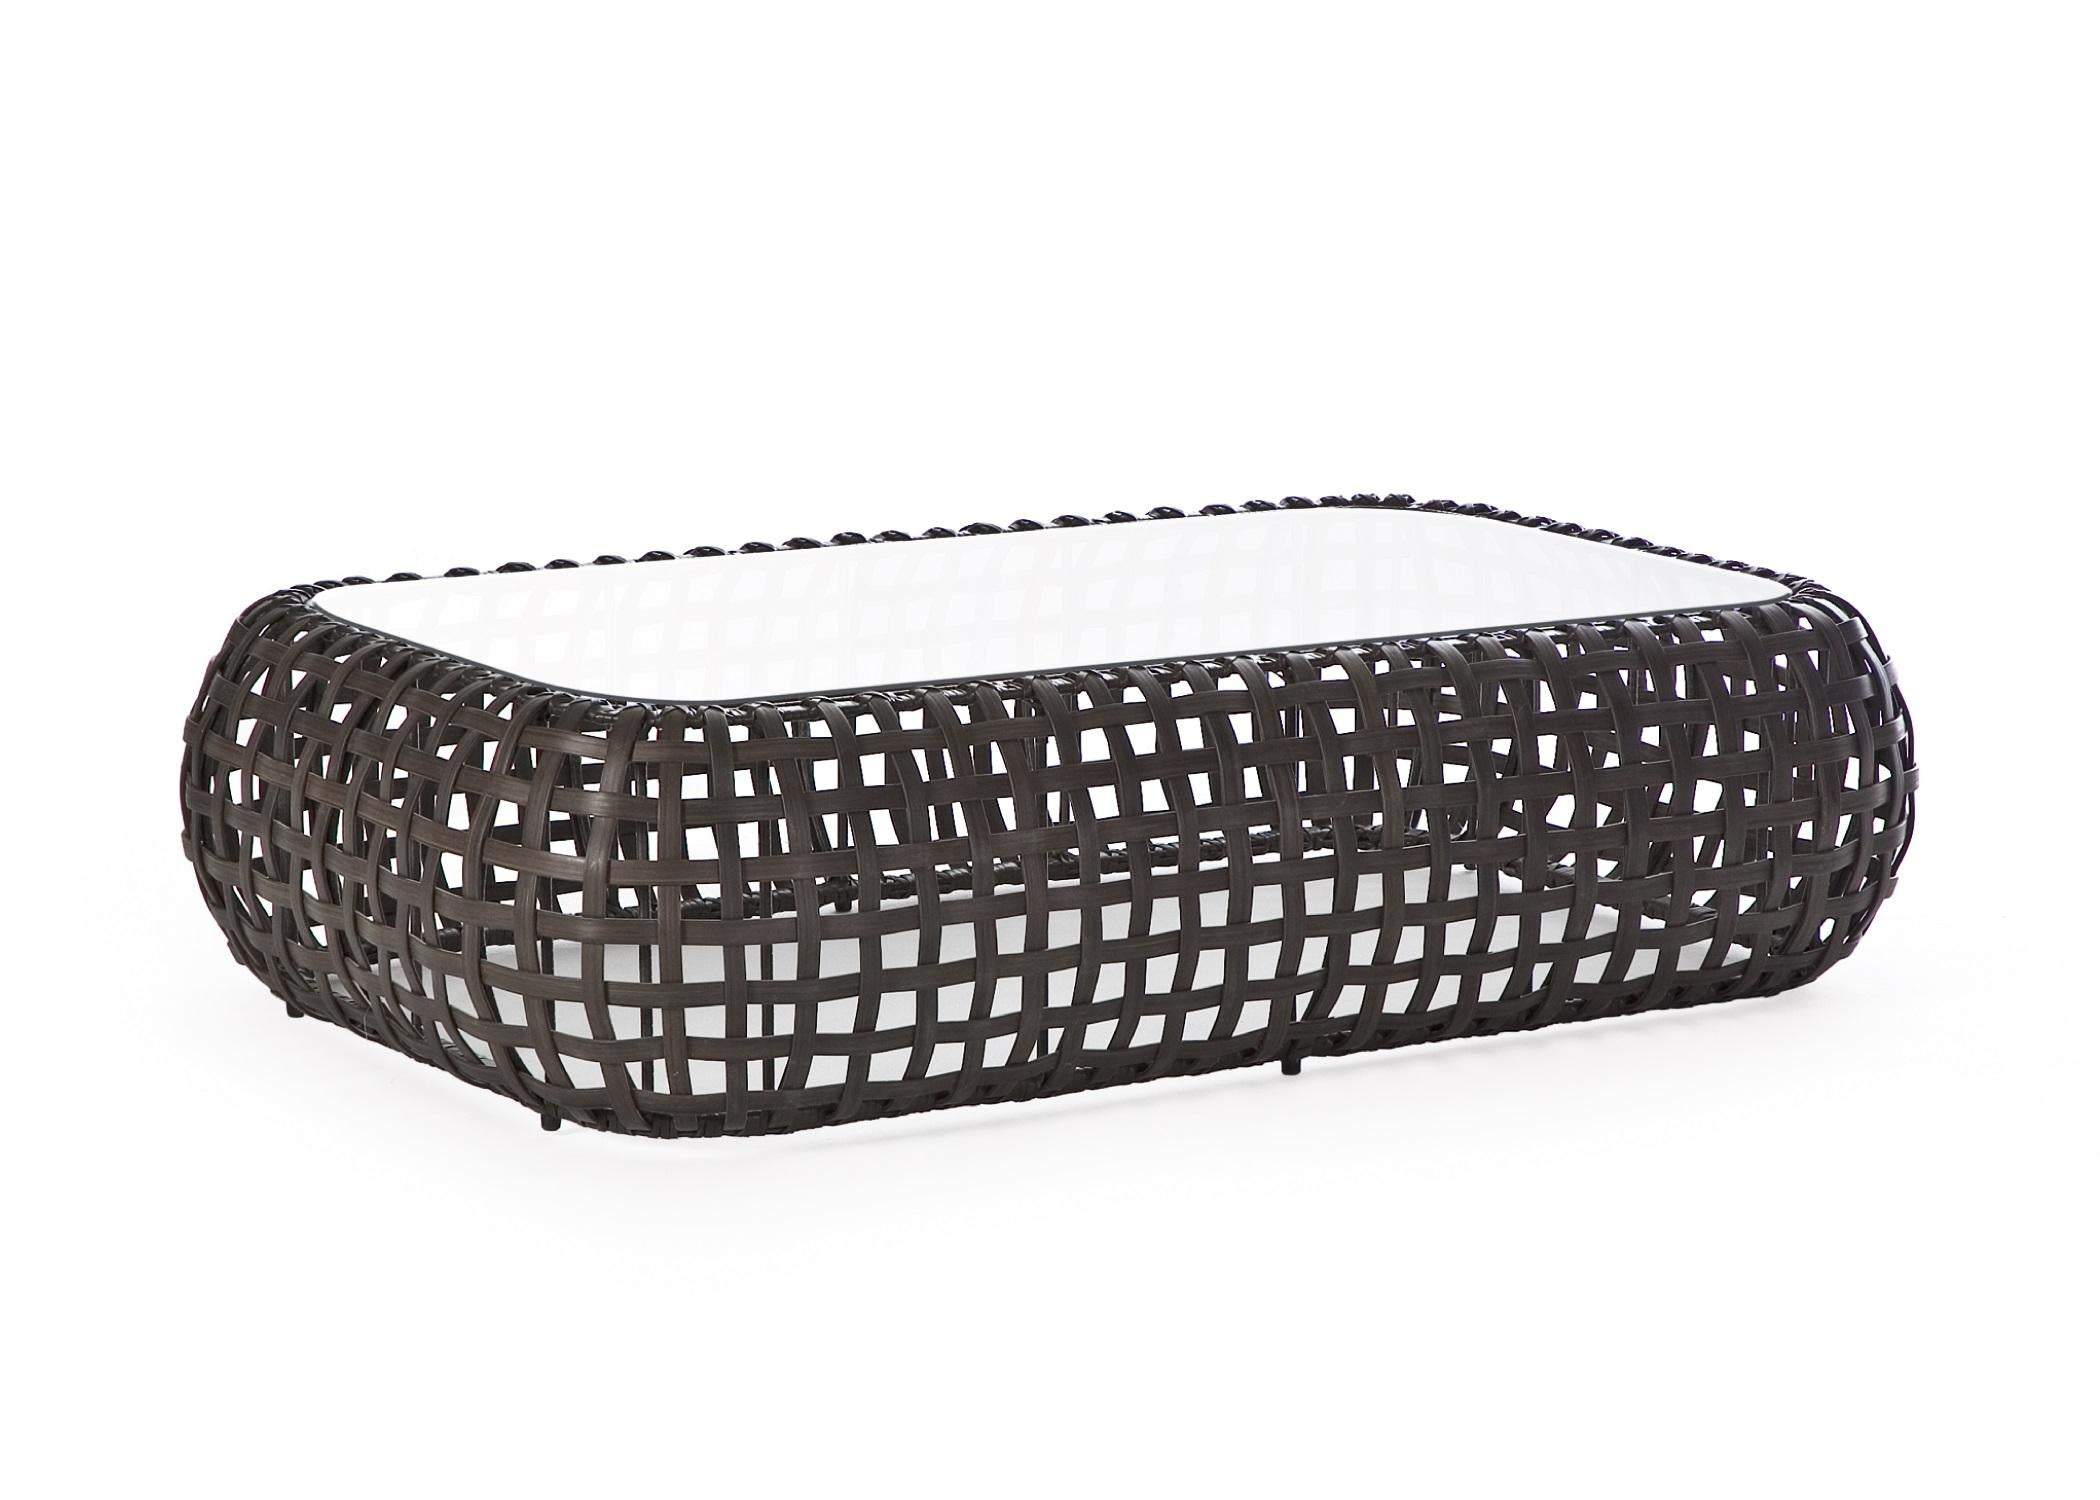 Outdoor Matilda coffee table by Kenneth Cobonpue.
Materials: Polyethelene. Aluminum. Glass. 
Also available in other colors and for indoors.
Dimensions:
Glass 71cm x 121cm x H 10mm
 Table 92cm x 142 cm x H 35cm.

The same principle of a woven